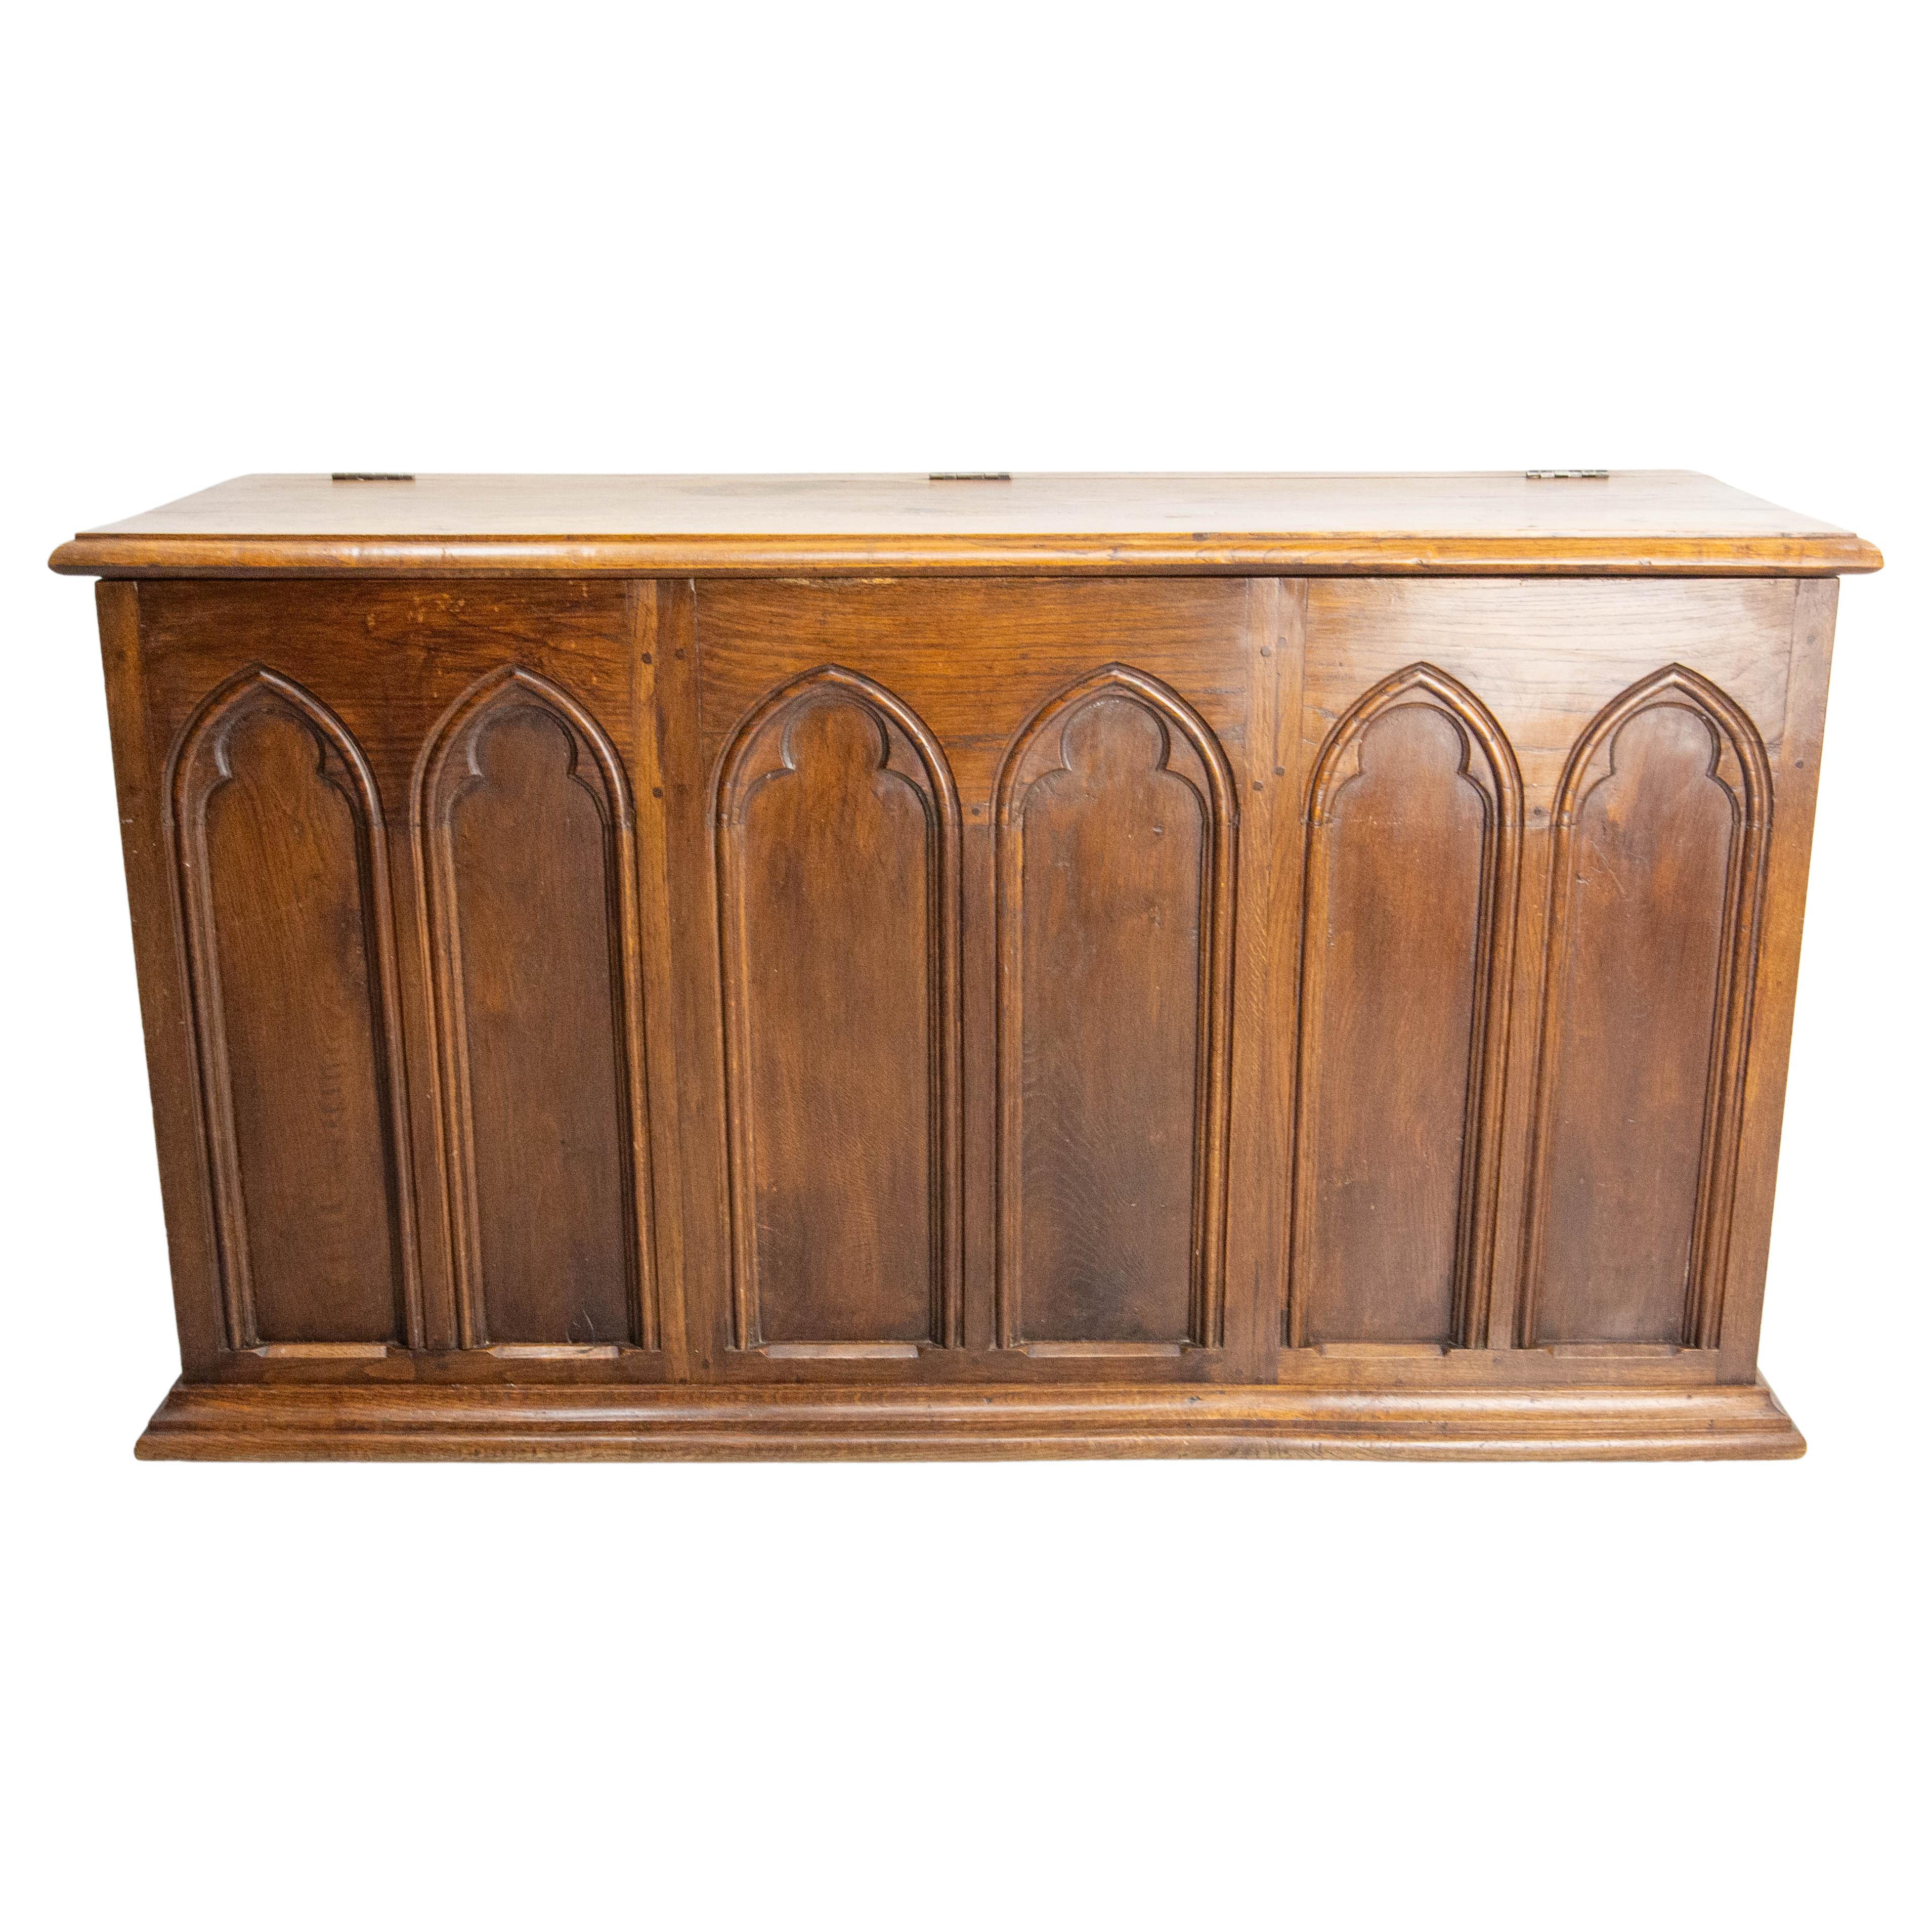 19th Century Chest or Coffer Carved Oak, French Gothic Revival Style For Sale